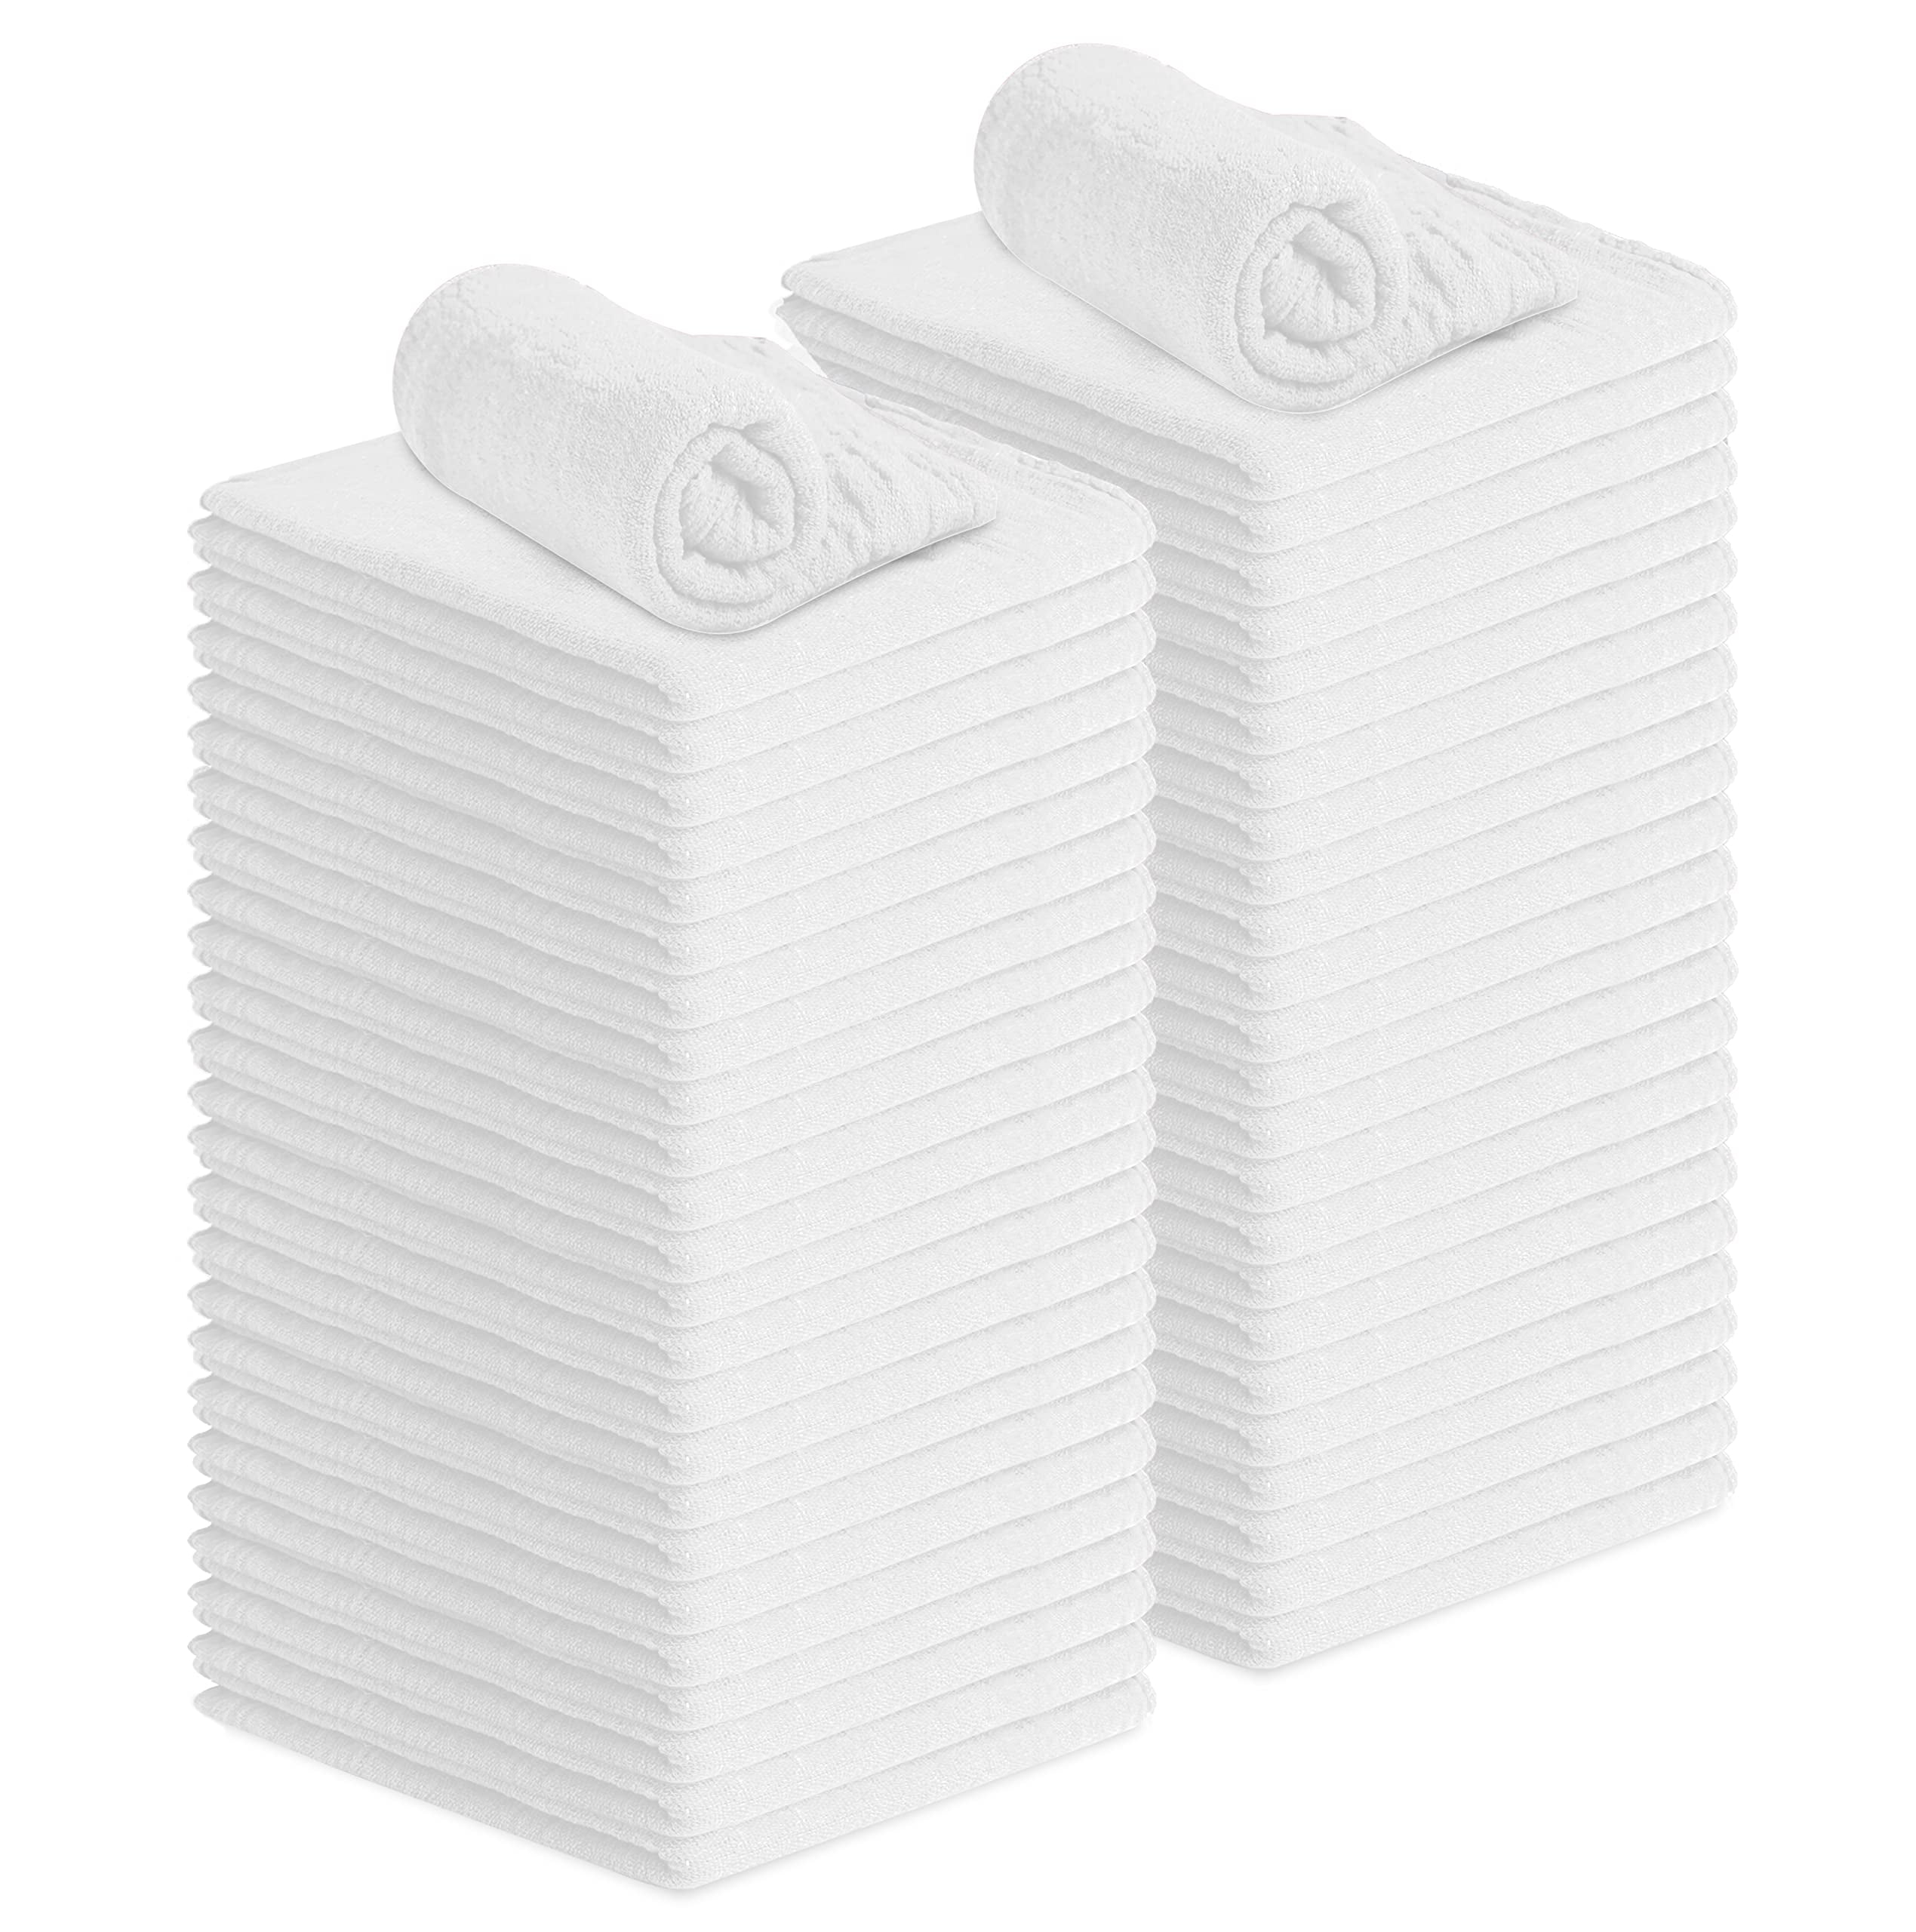 White Shop Towels, 14 in. x 13 in., 50-Pack